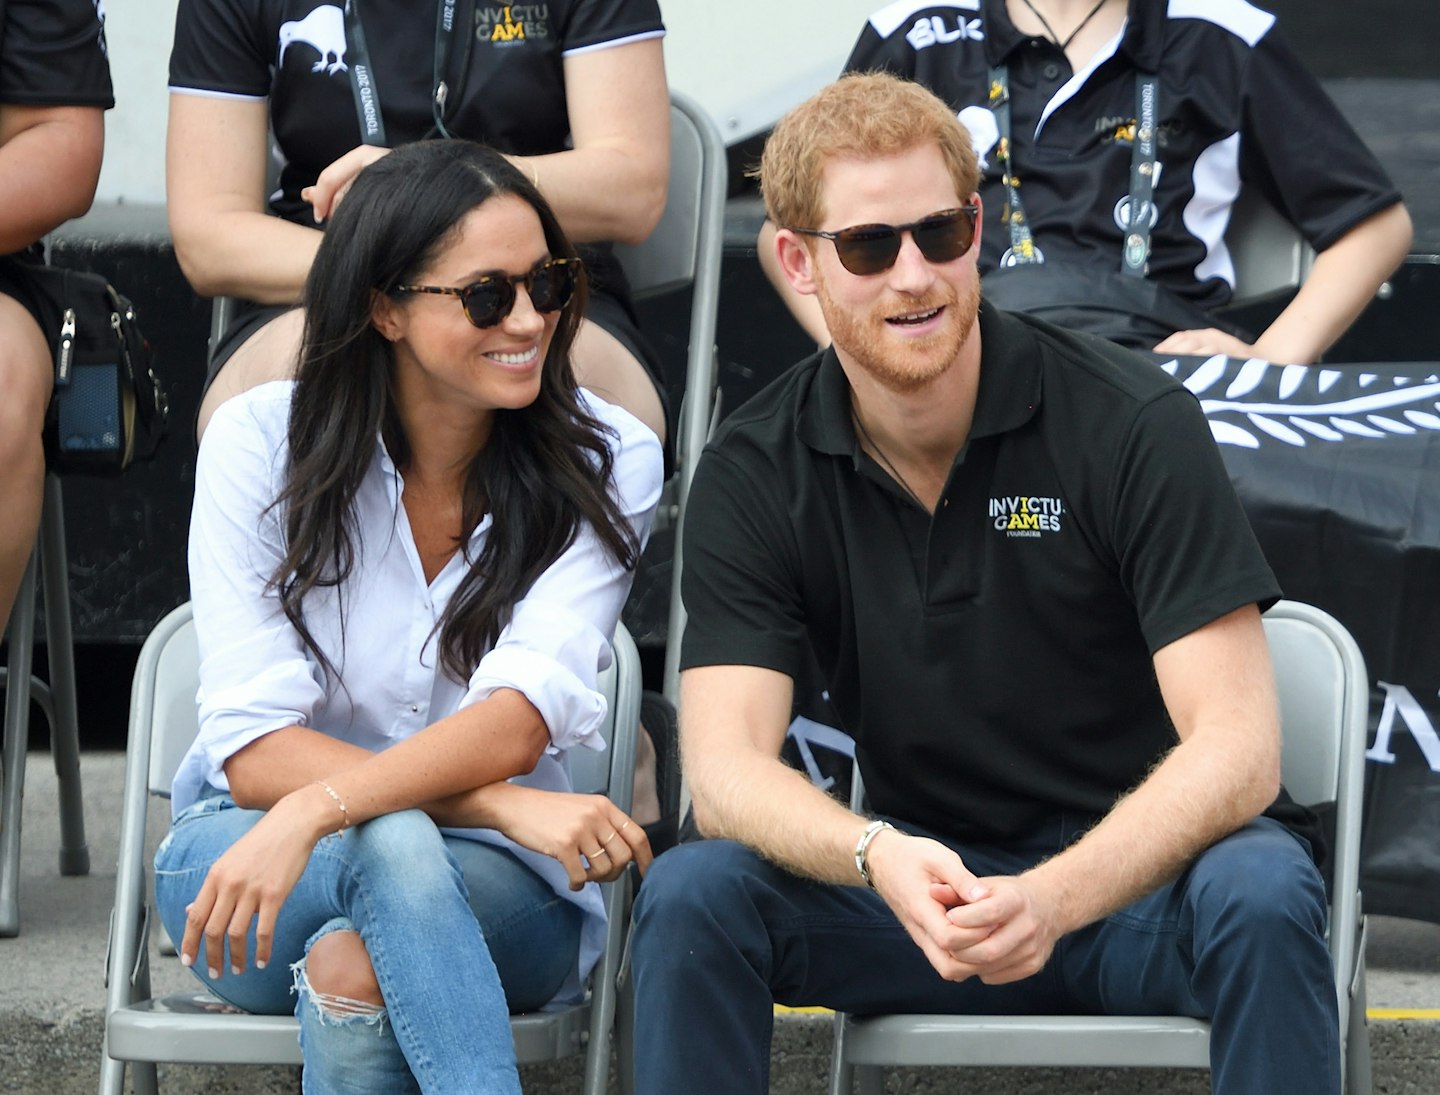 Meghan Markle and Prince Harry at the Invictus Games in 2007